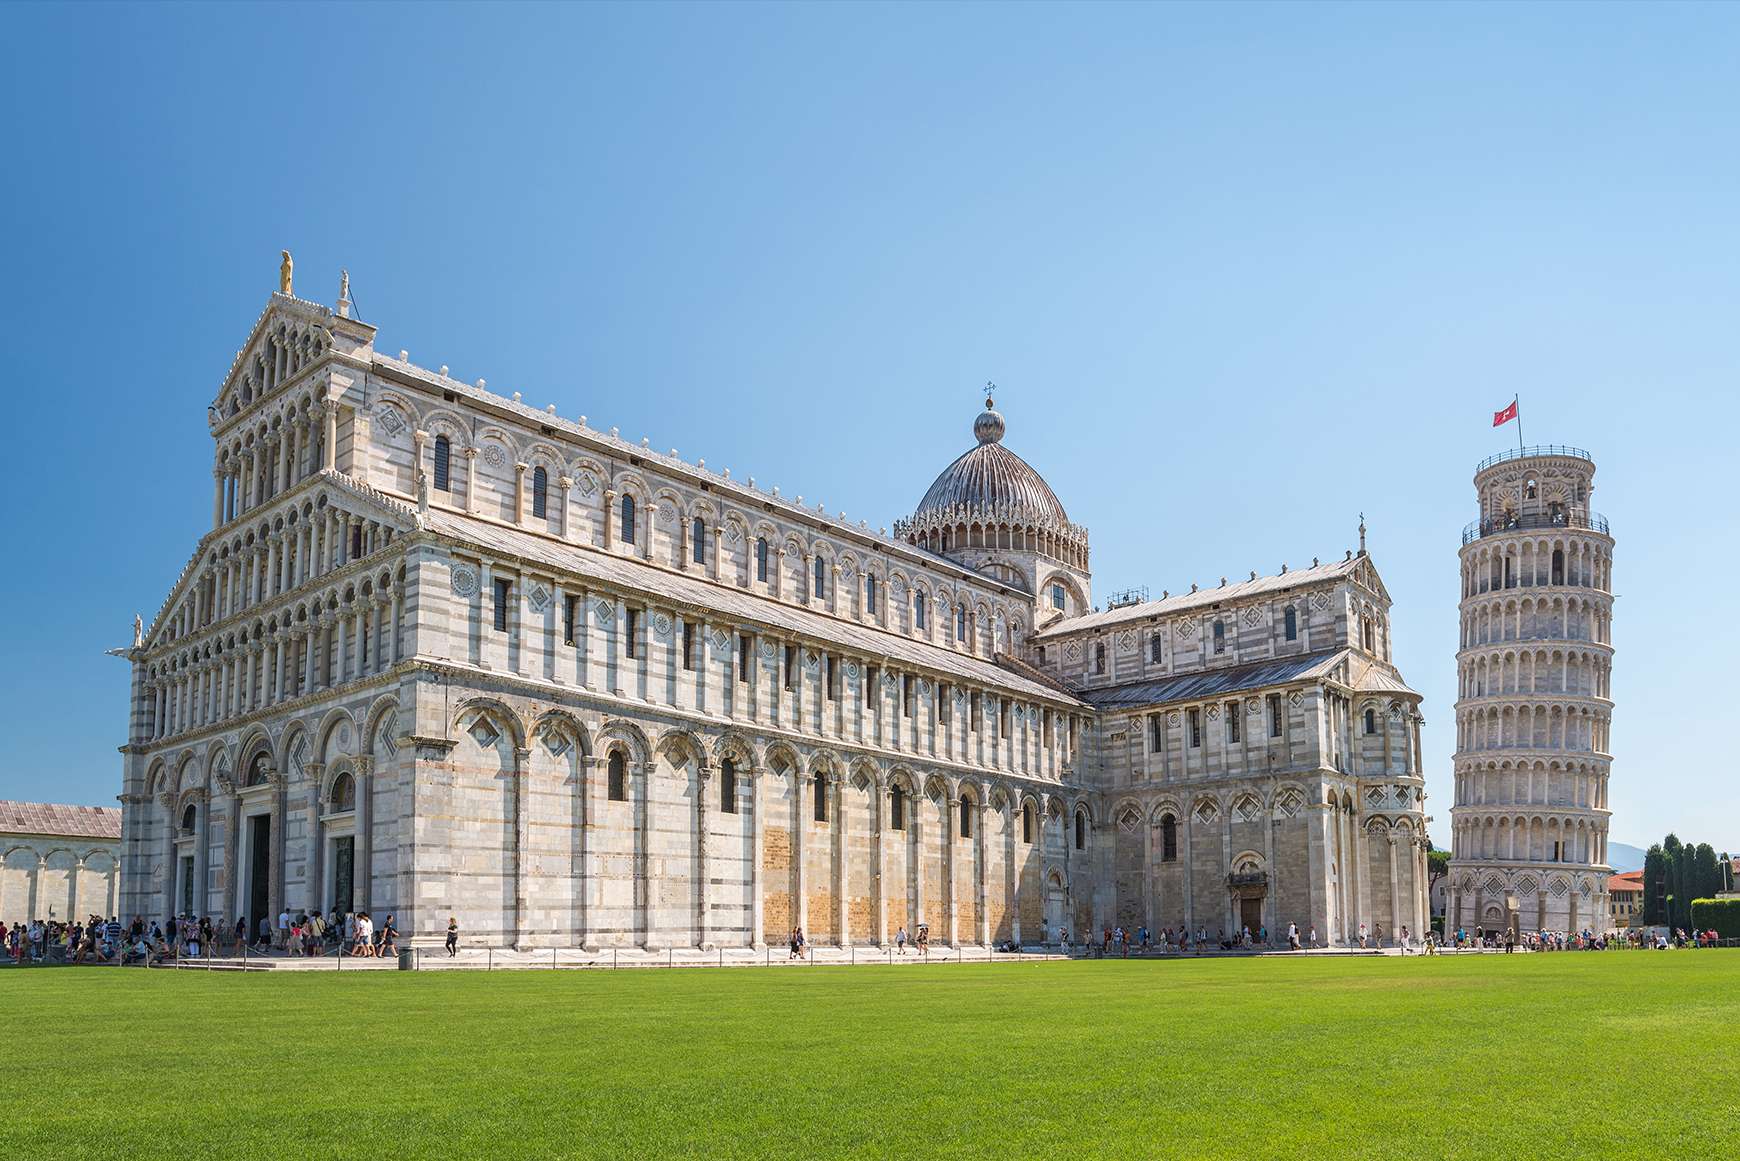 Exterior view of the Pisa Cathedral with the Leaning Tower to its right